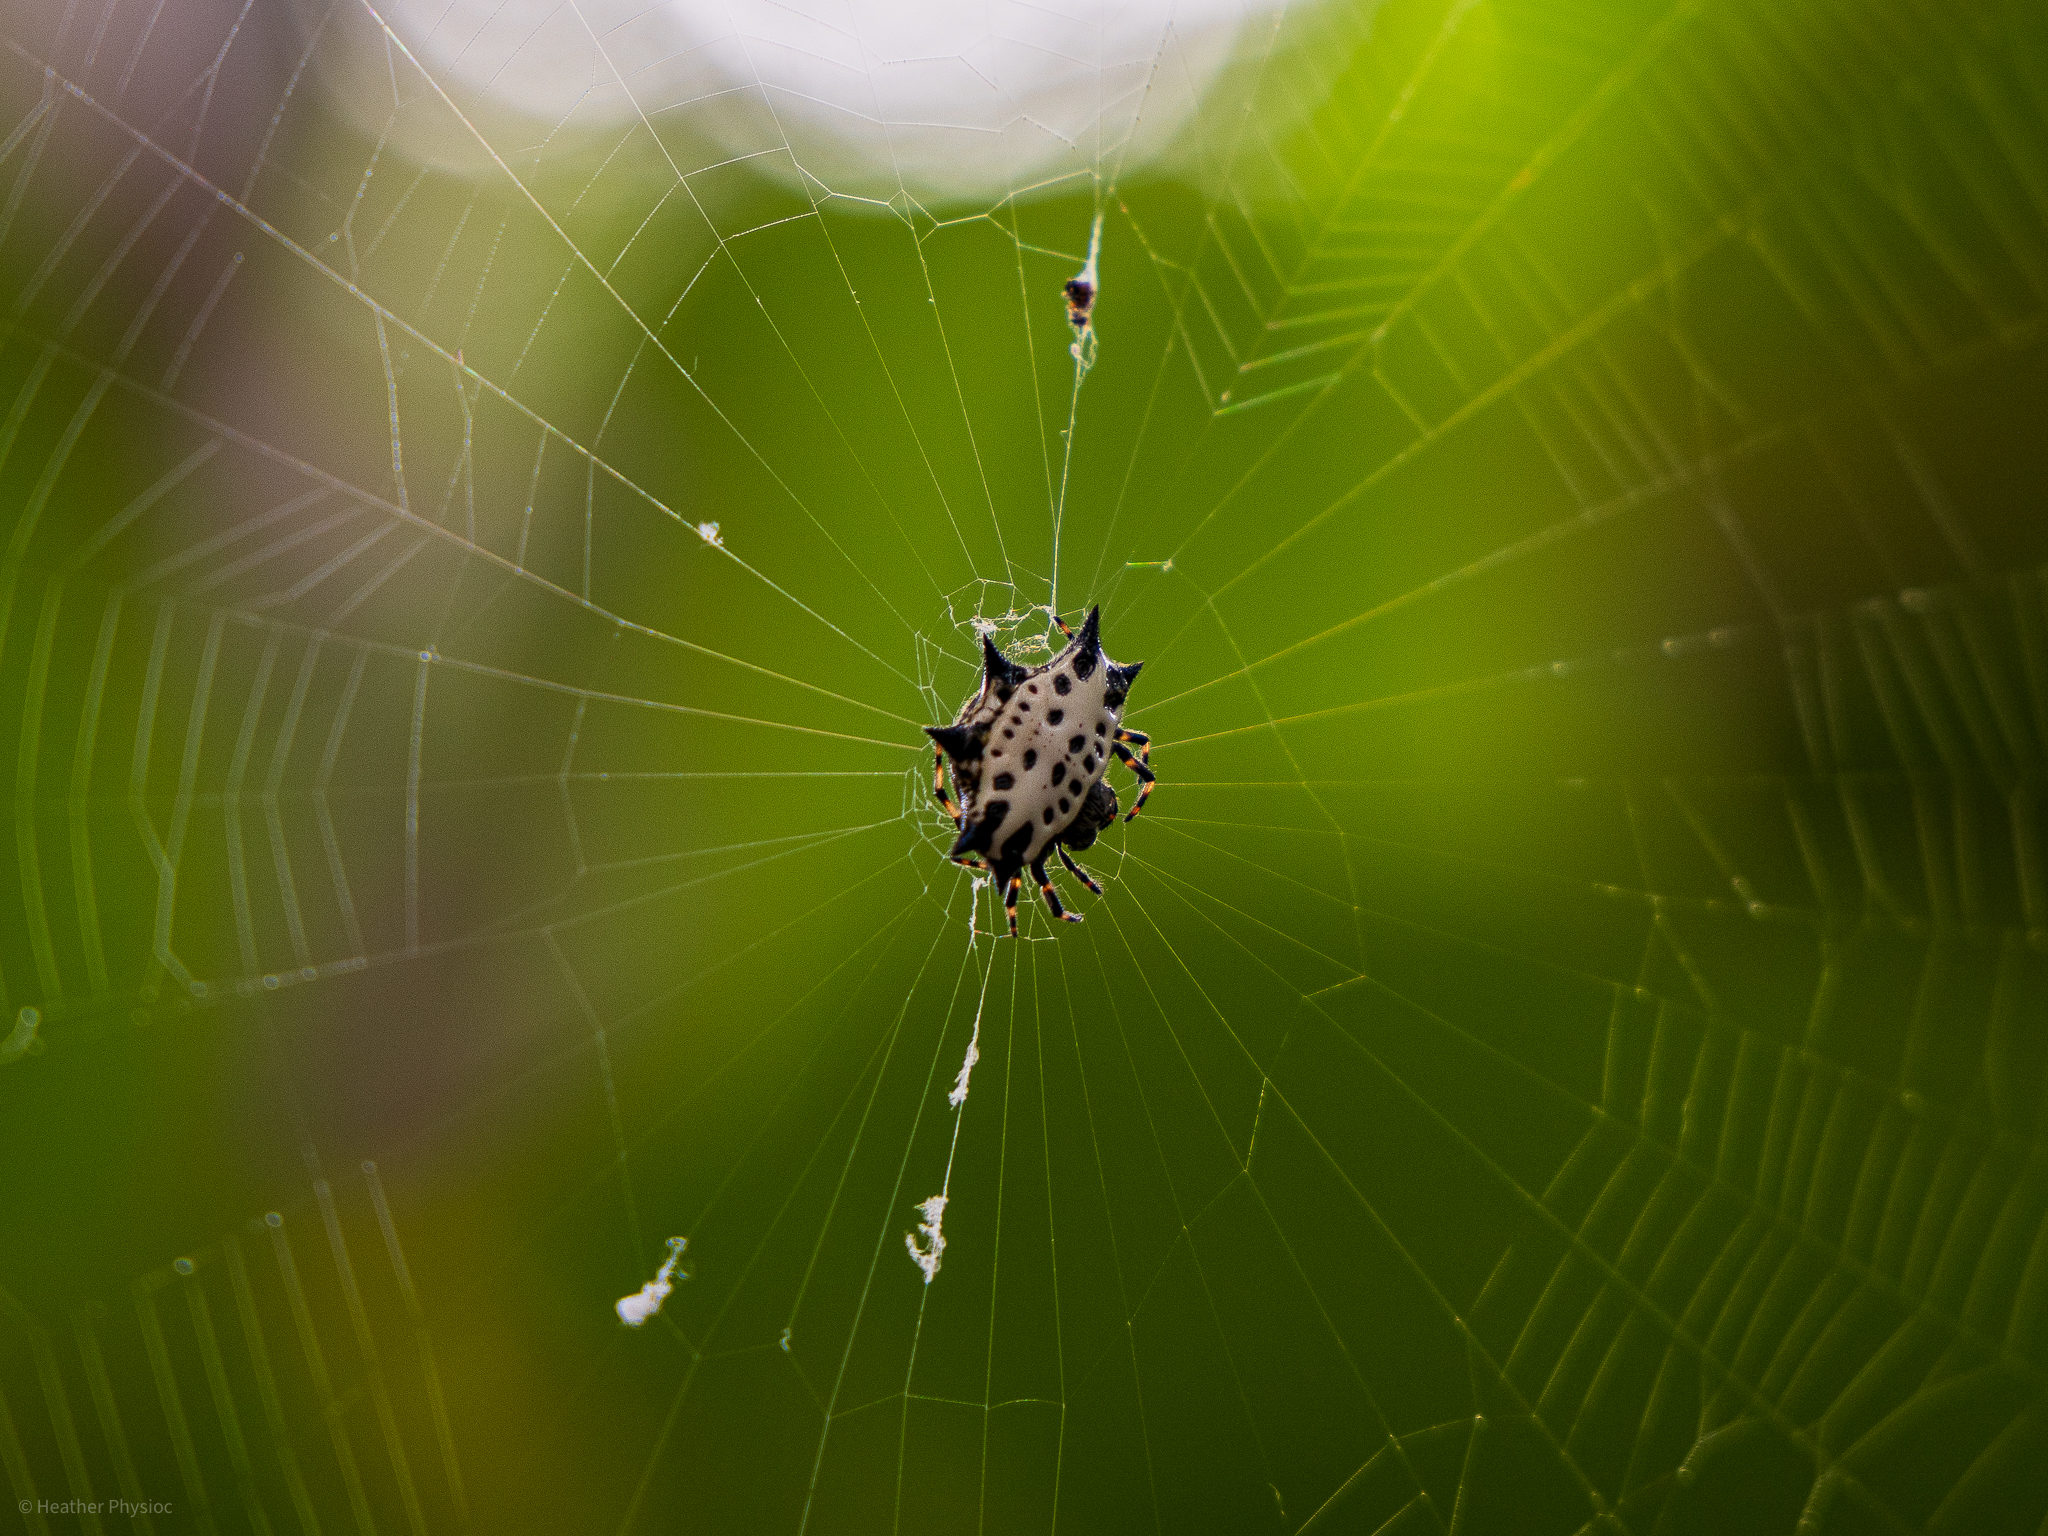 Spiny backed orb weaver spider in its web at Punta Laguna in Ycatan, Mexico